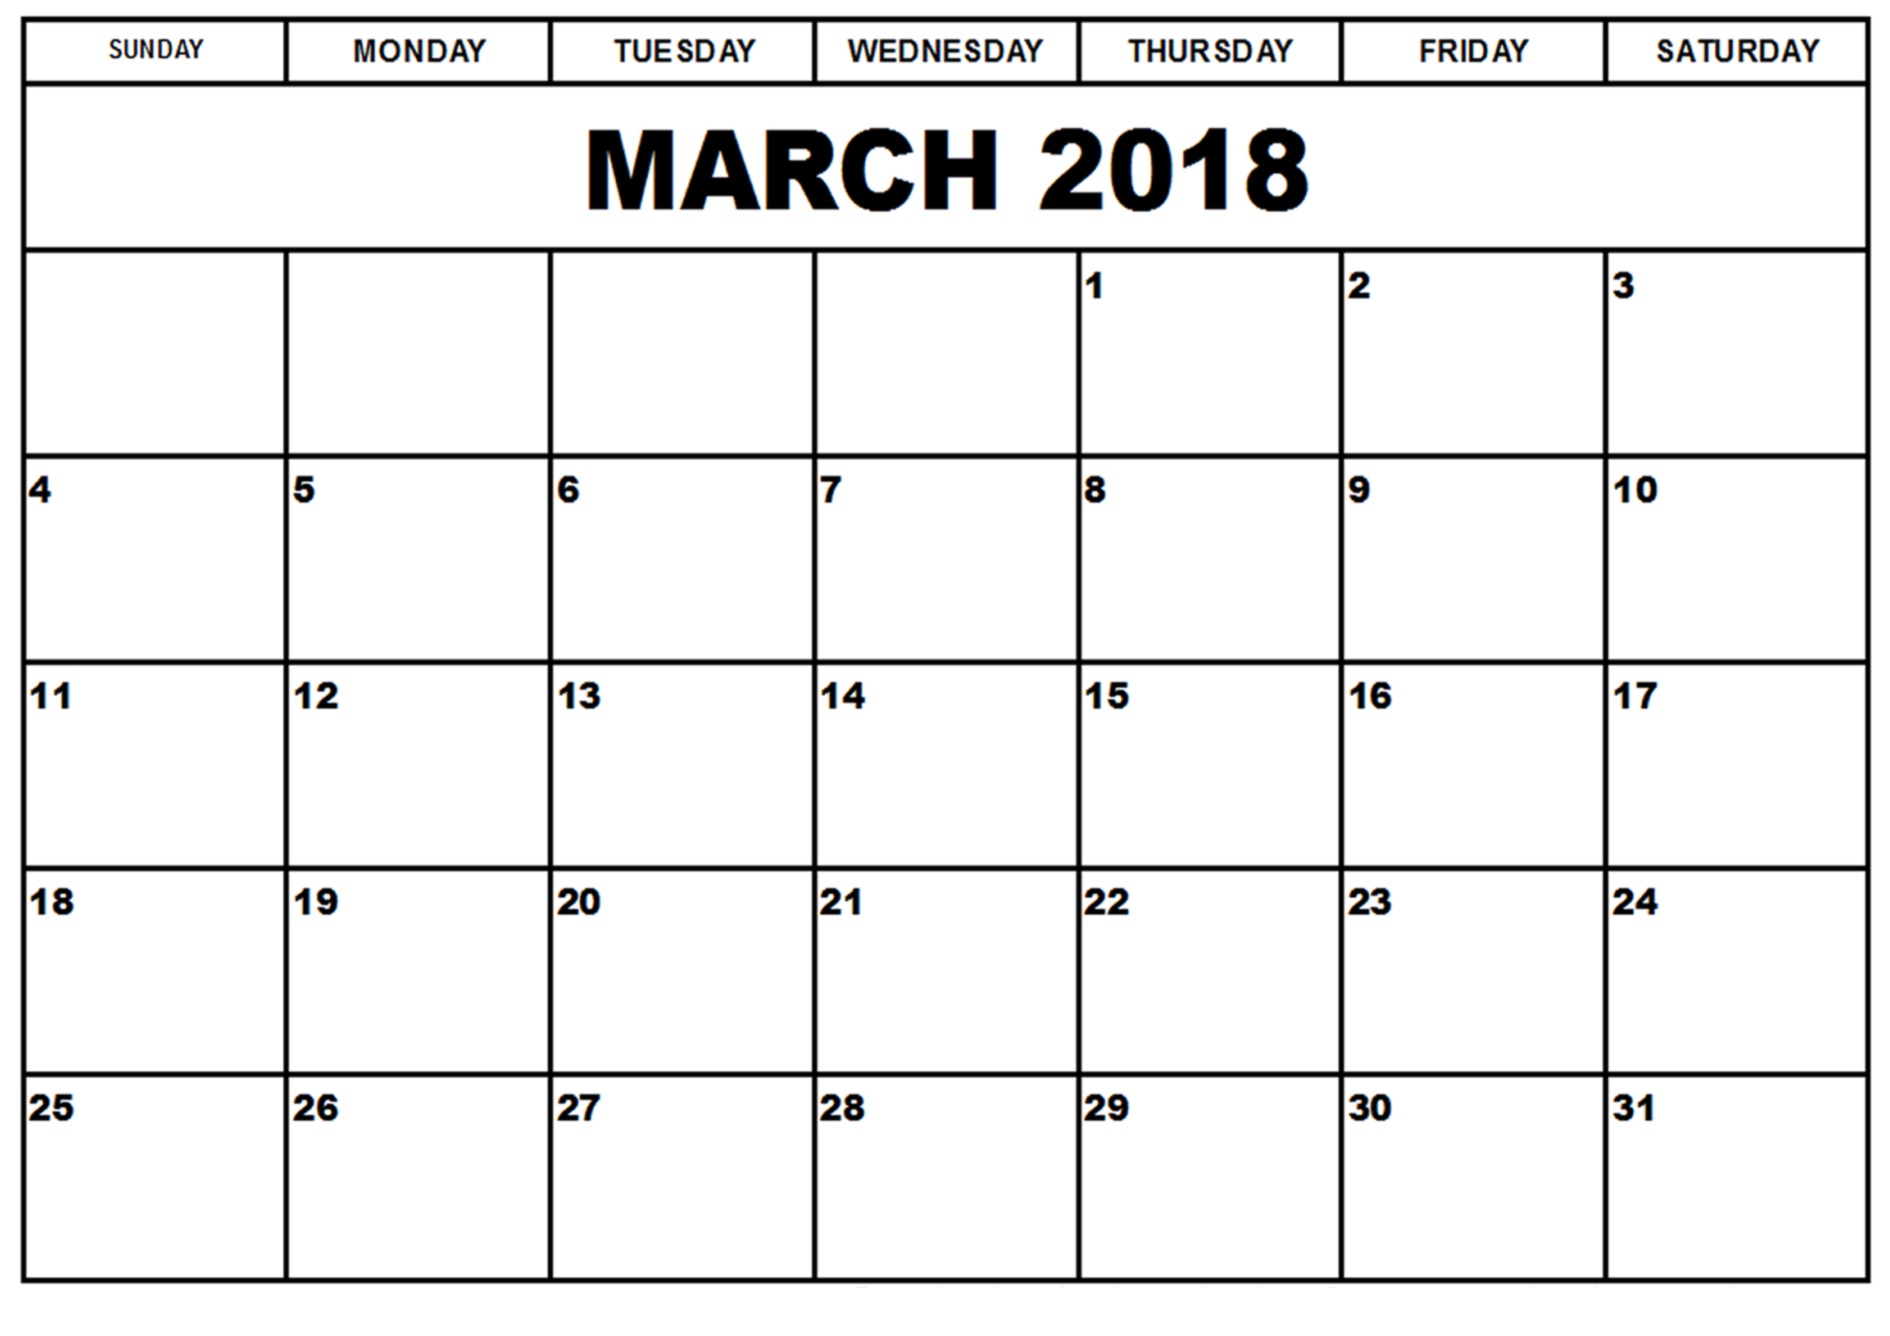 March 2018 printable calendar with 7 week days